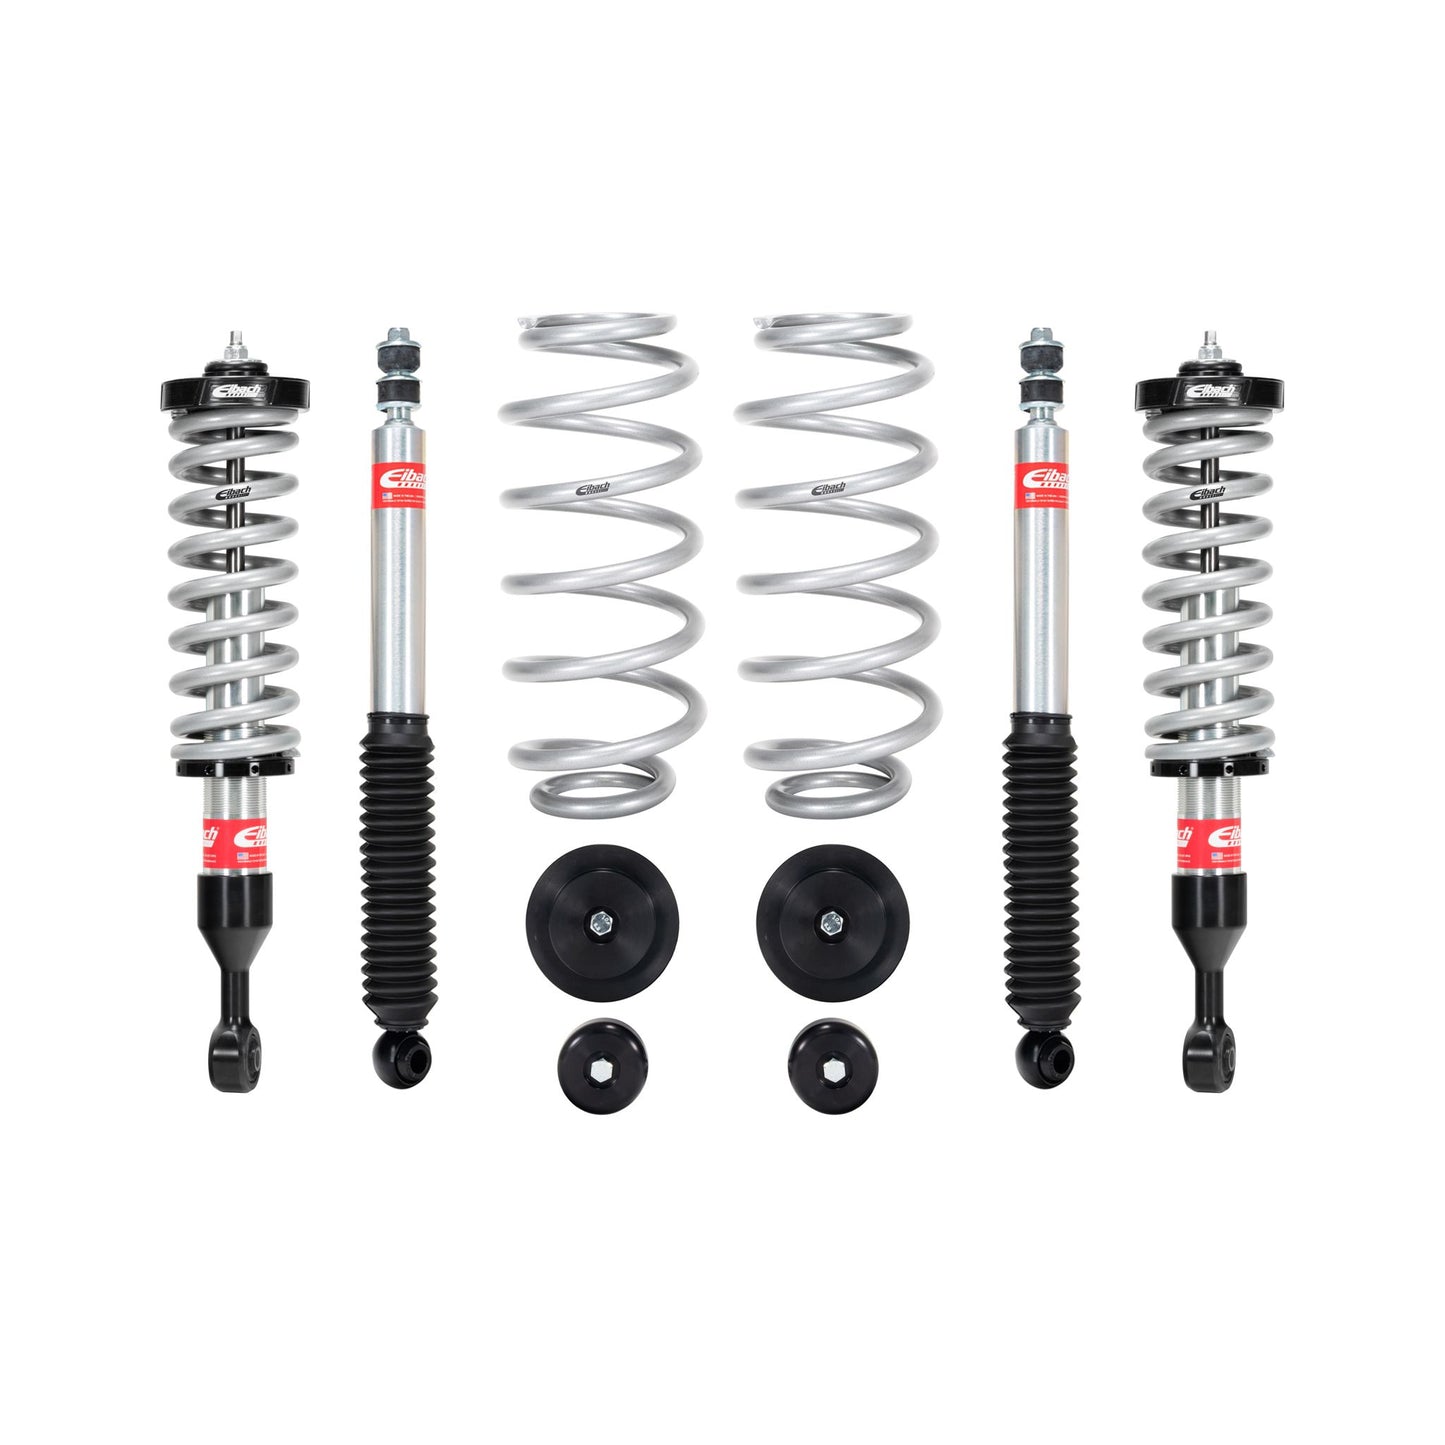 Eibach Springs PRO-TRUCK COILOVER STAGE 2 - Front Coilovers + Rear Shocks + Pro-Lift-Kit Spring E86-59-005-01-22